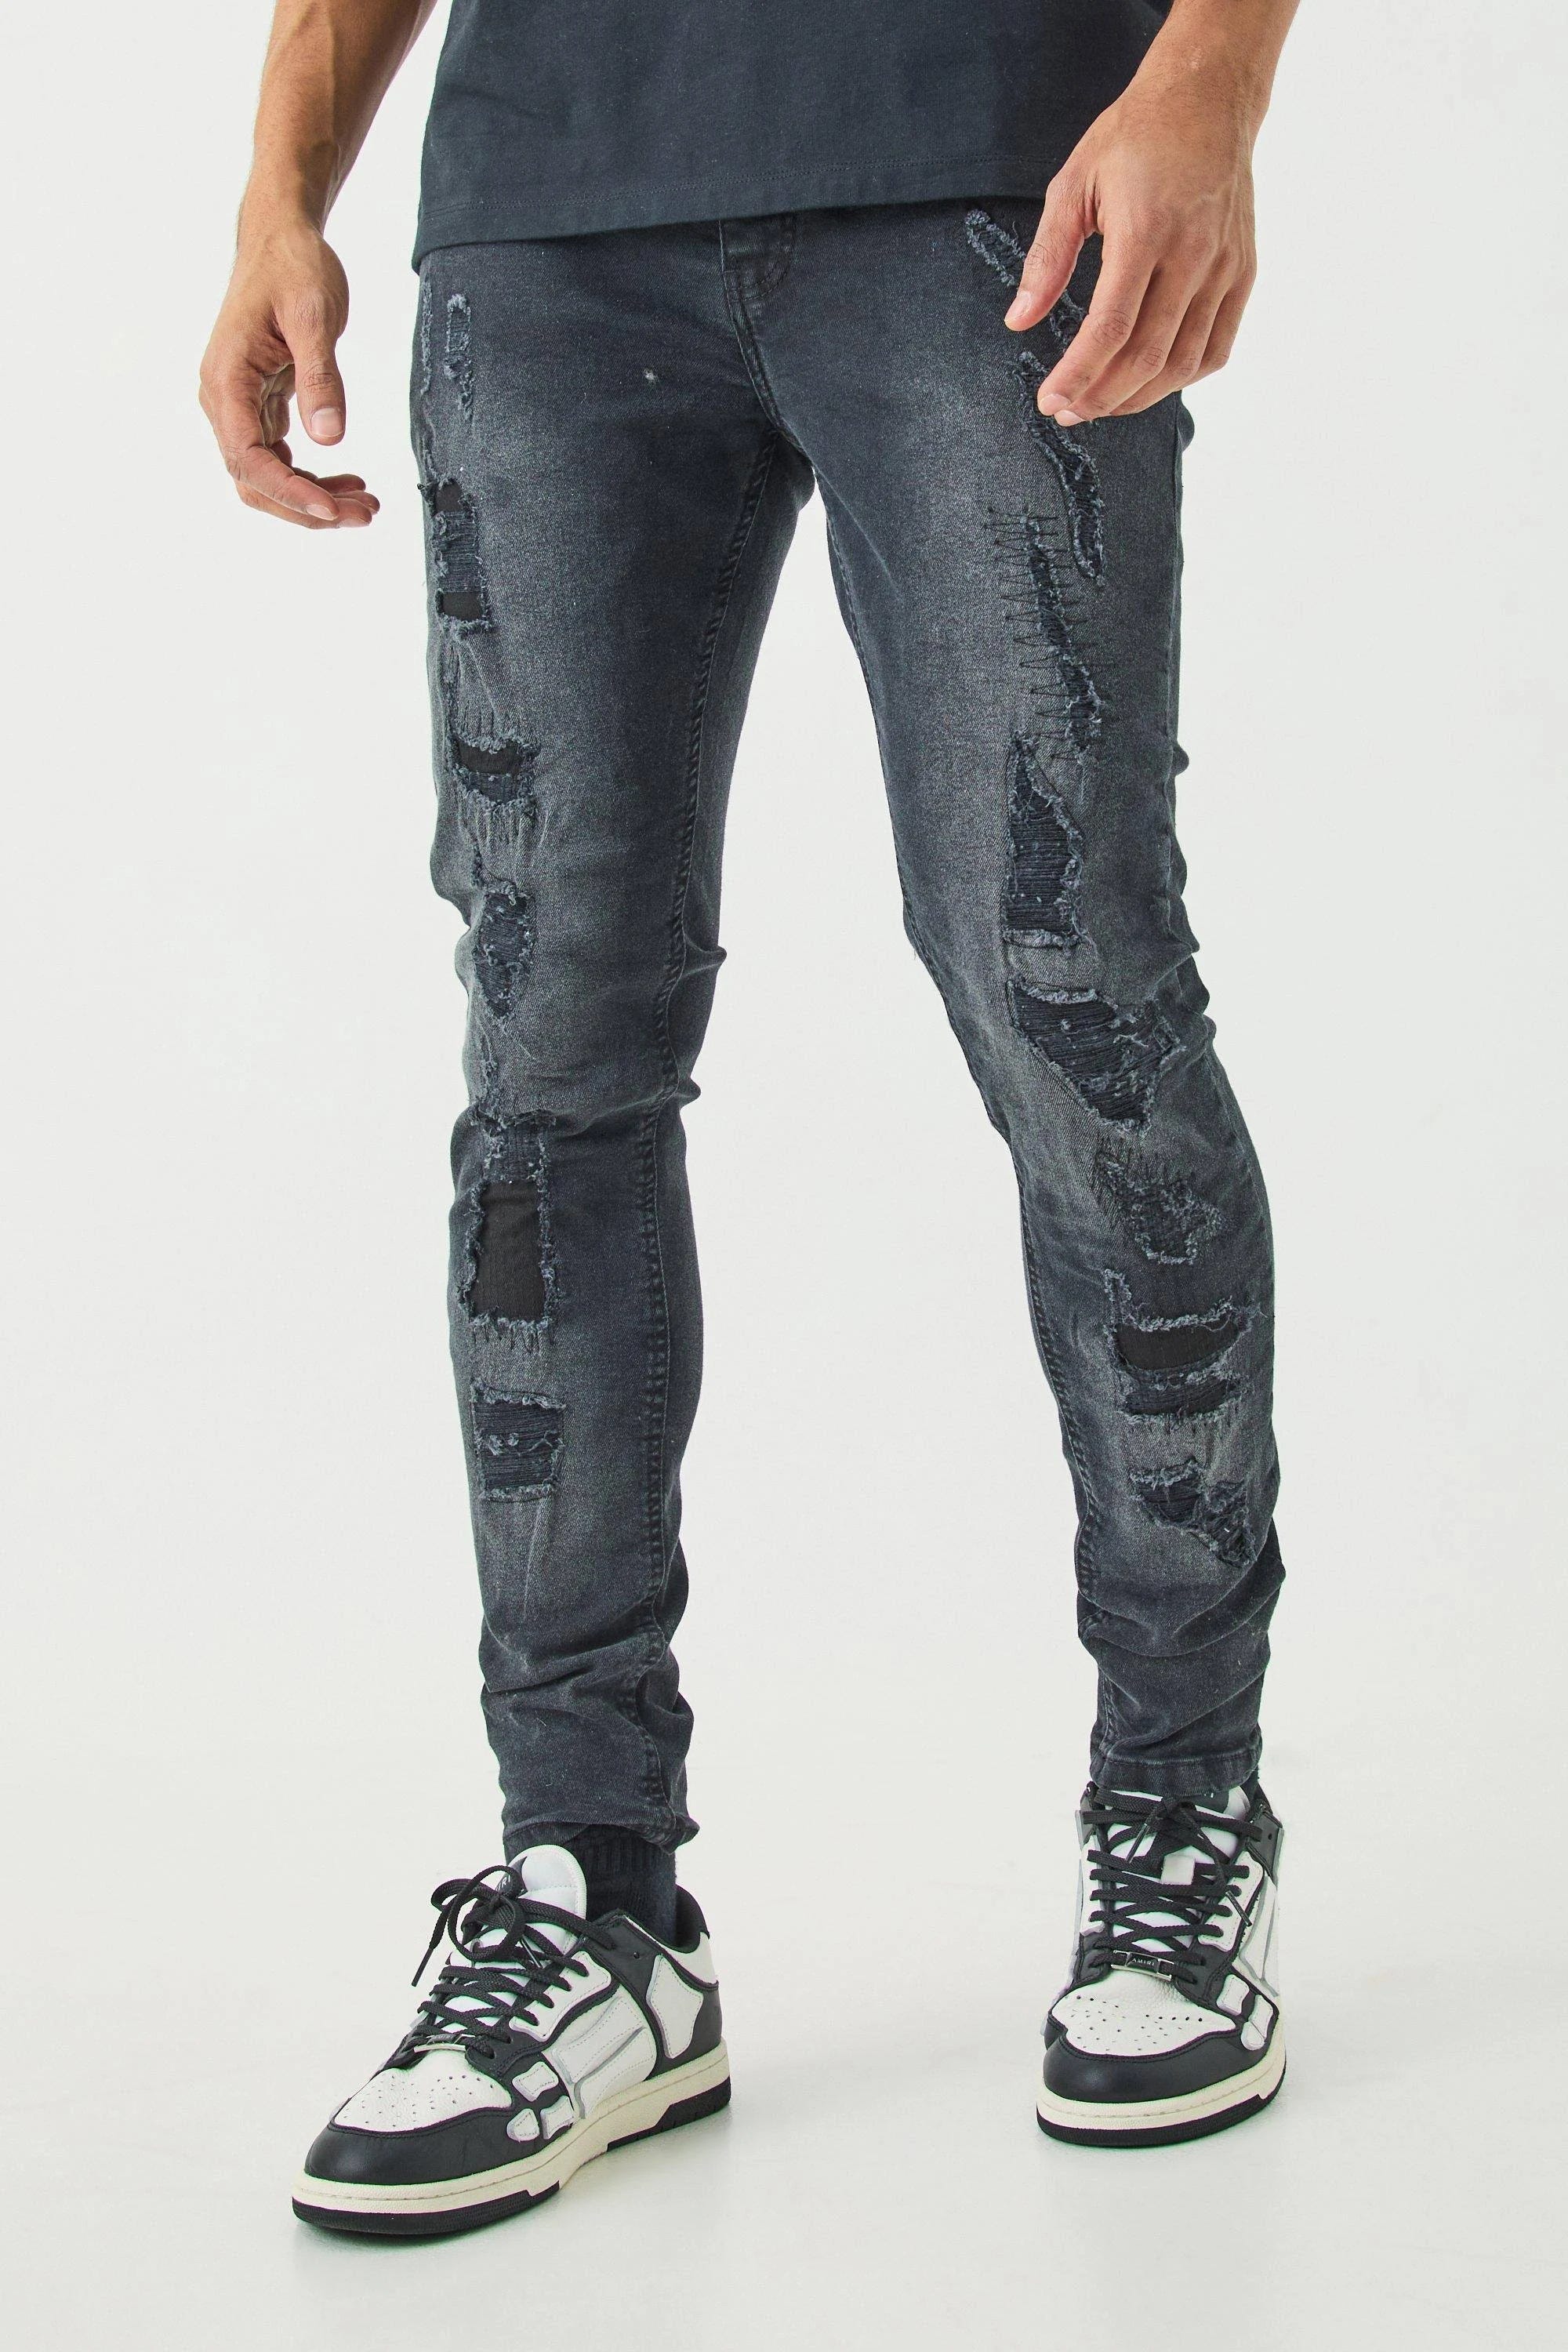 Modern Black Skinny Jeans with All-Over Rips | Image